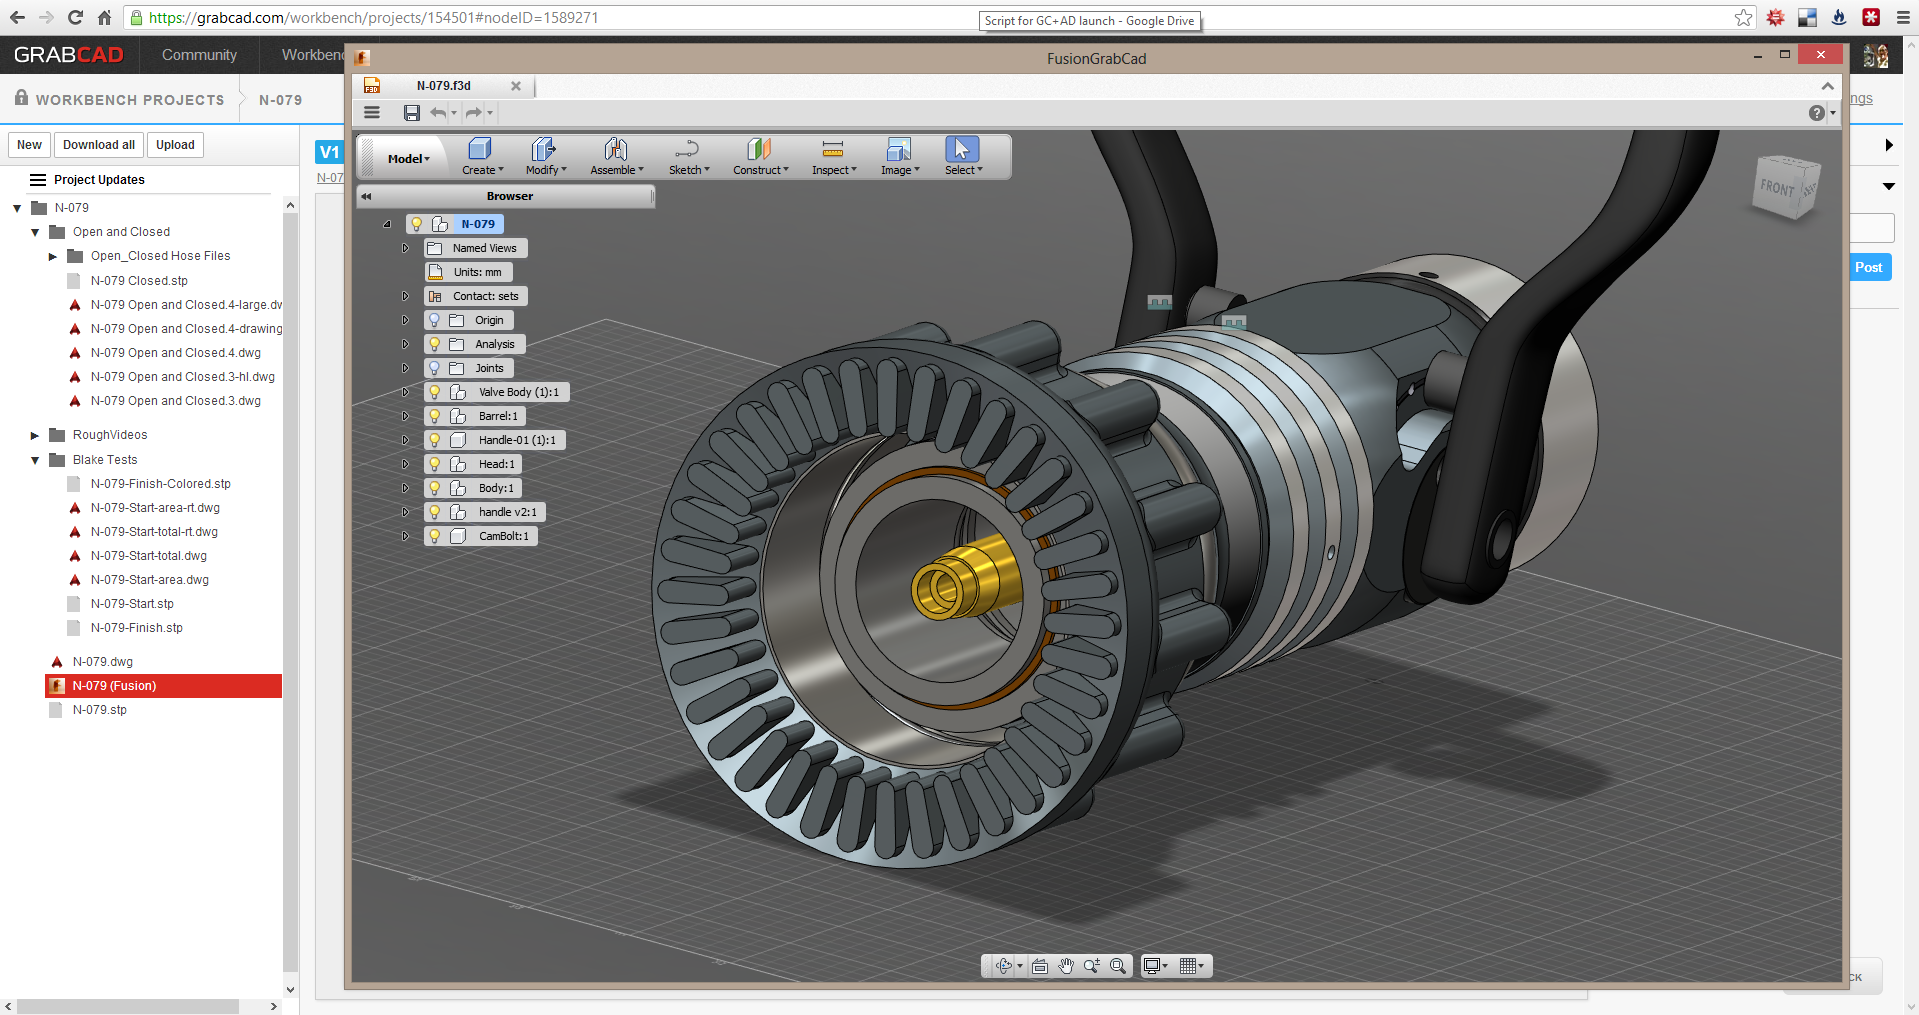 fusion 360 for free personal use